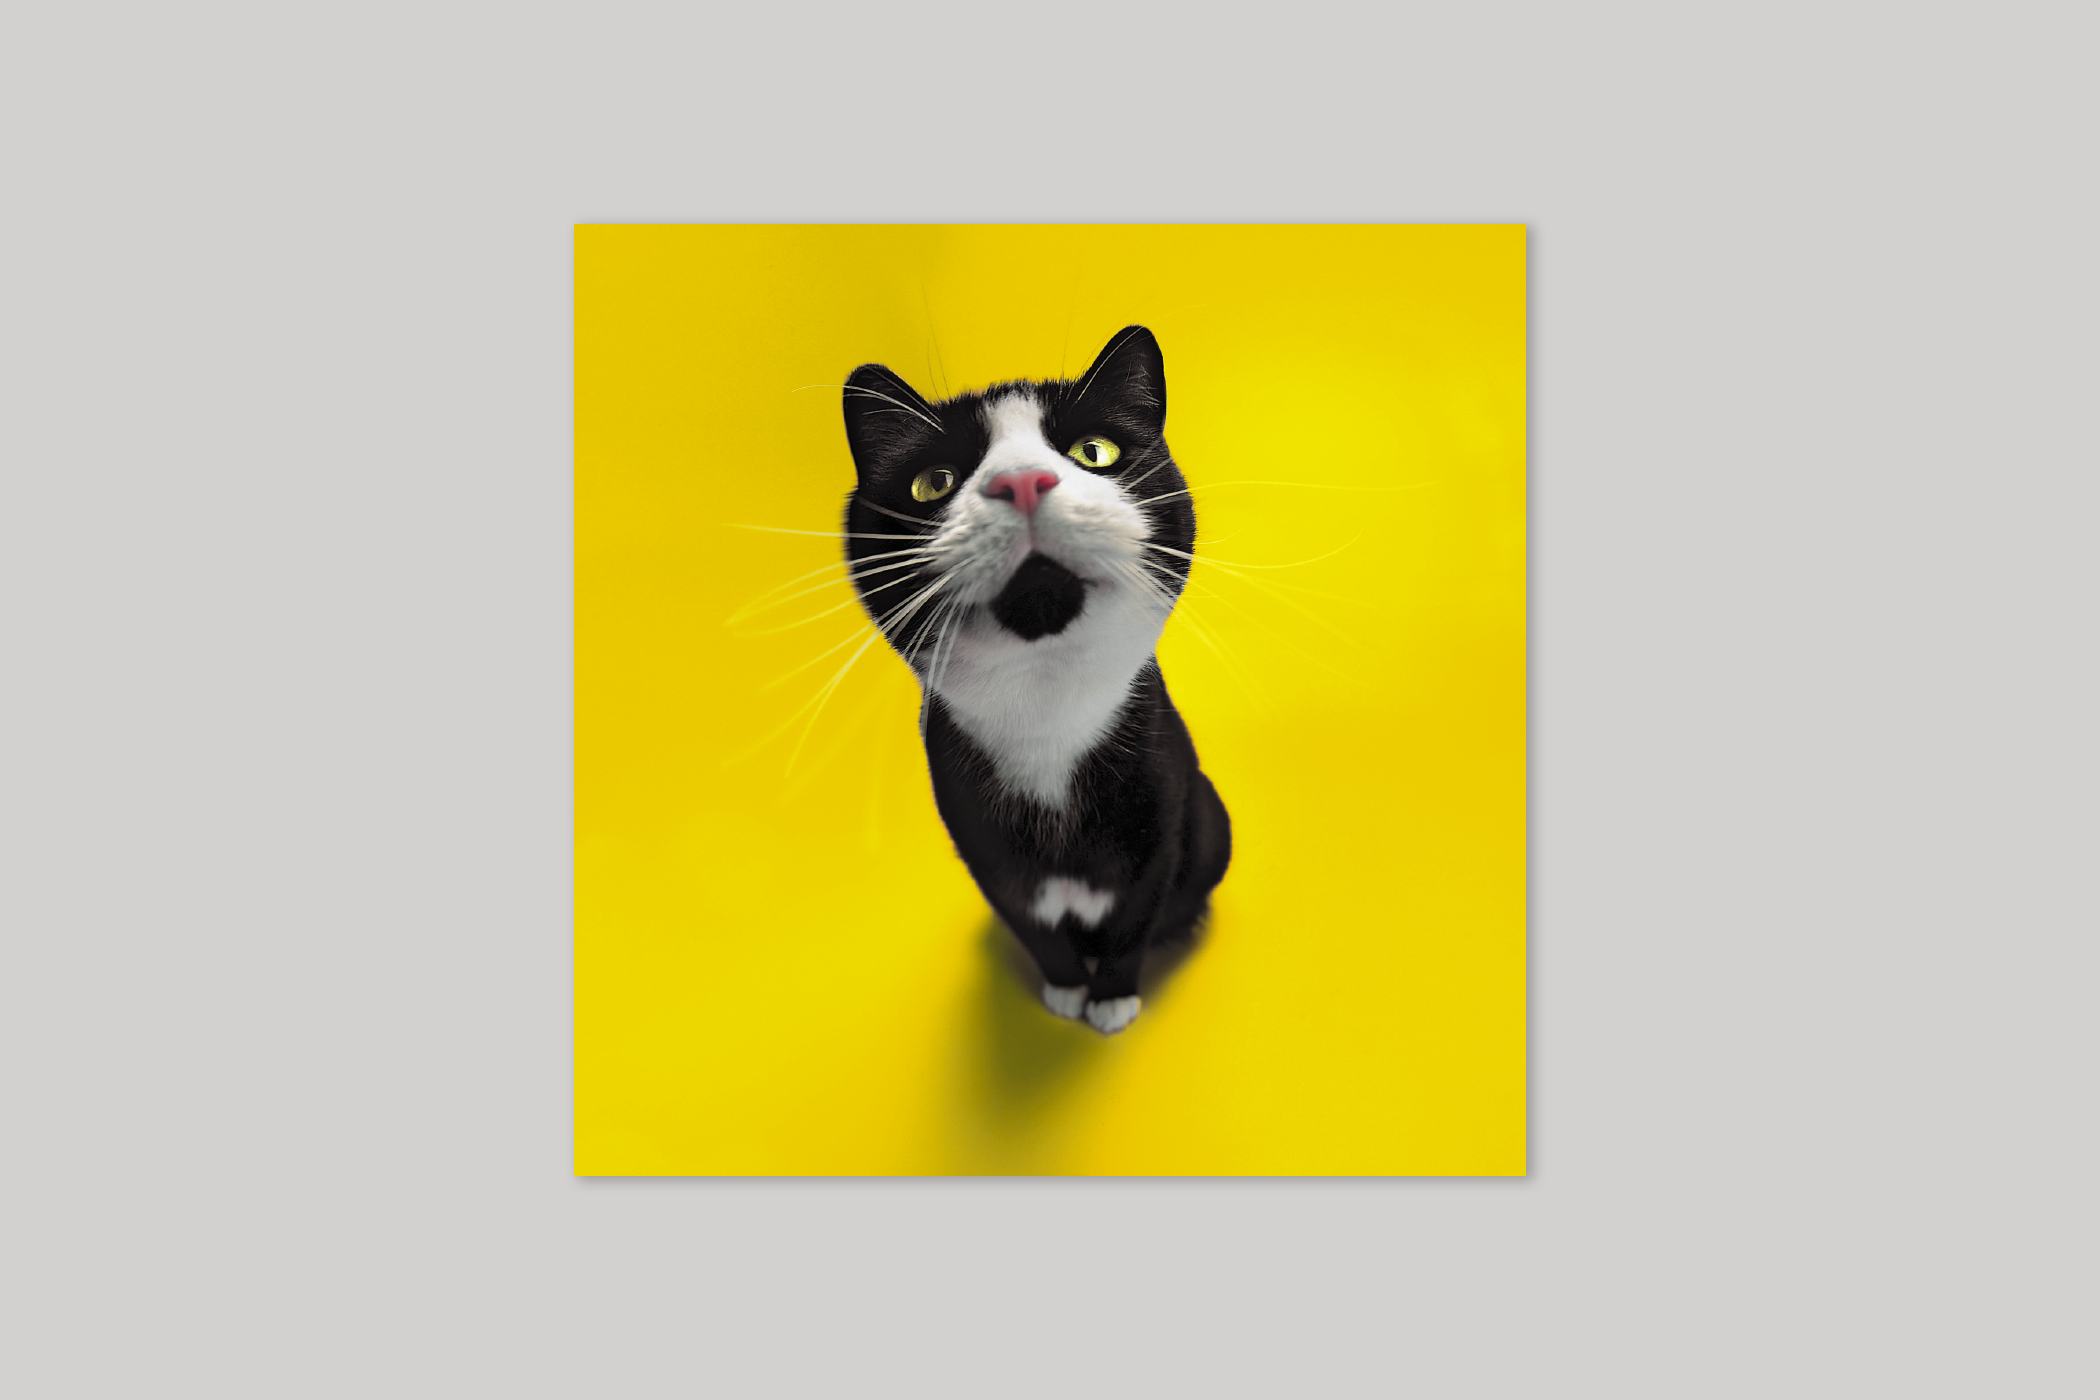 Meow! from Wildthings range of greeting cards by Icon.